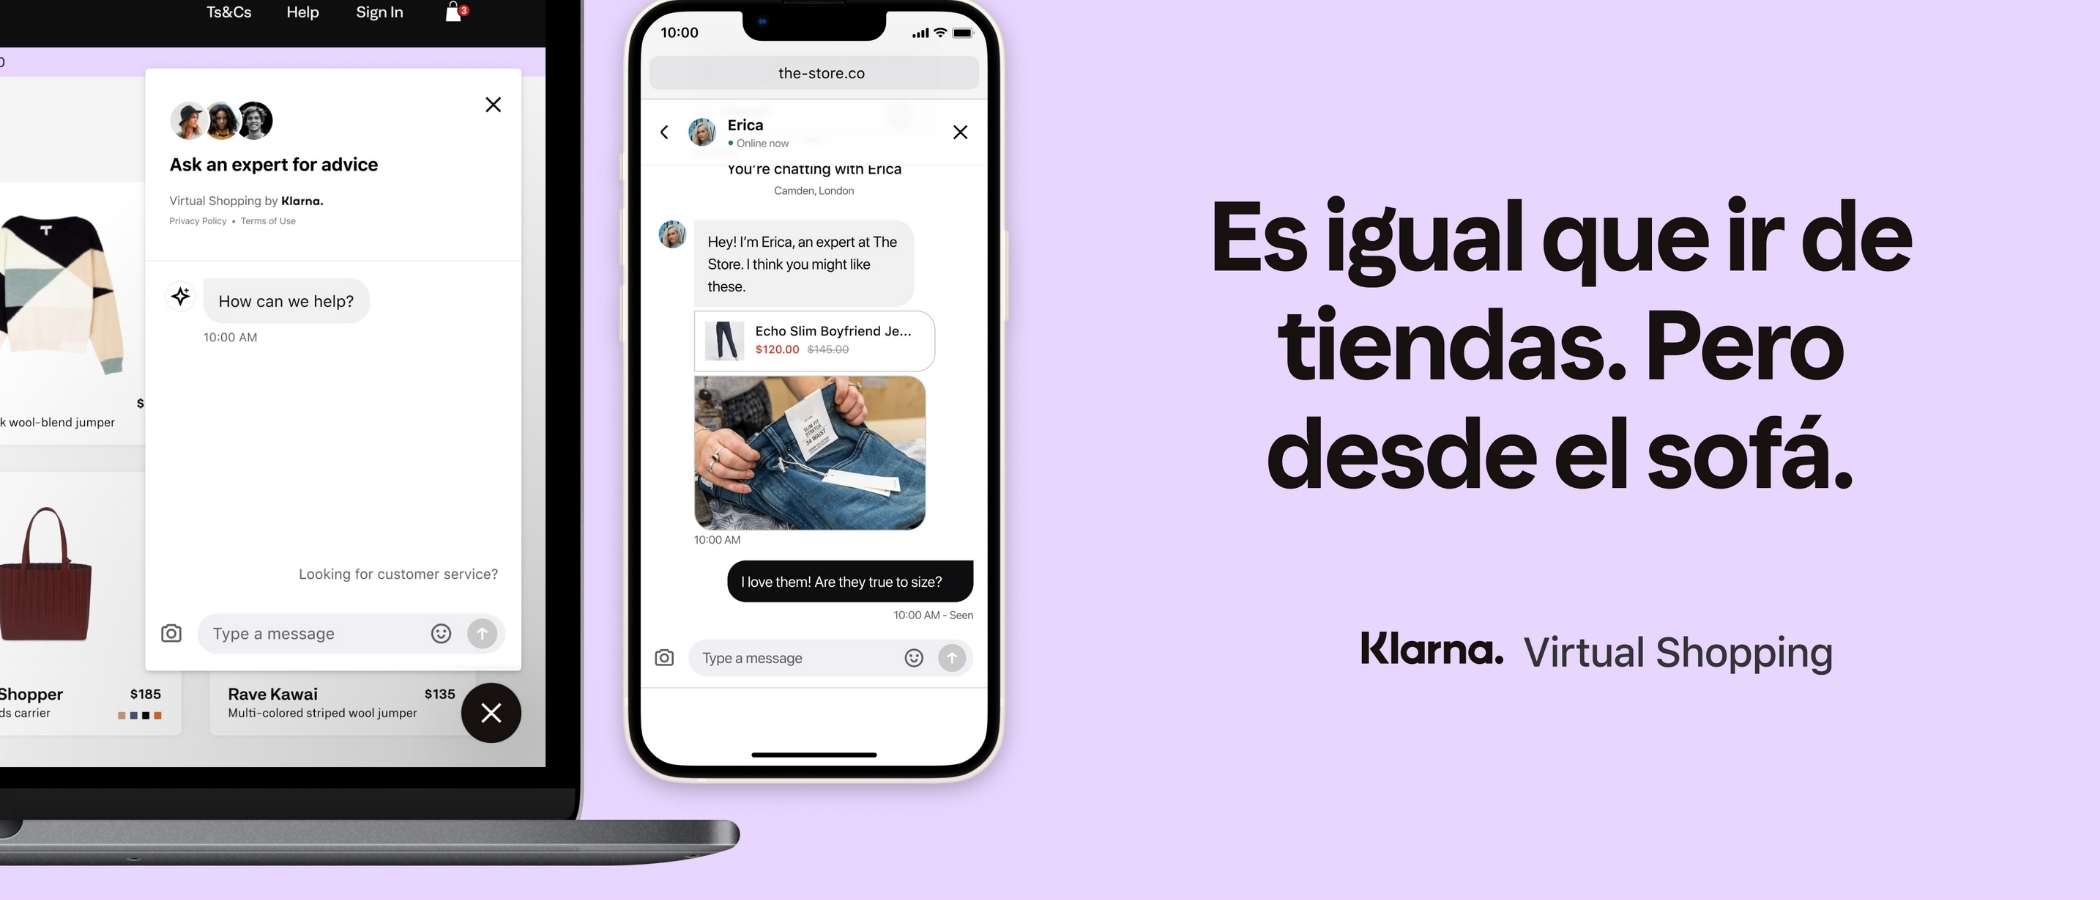 Klarna launches Virtual Shopping to bring the in-store experience to online shoppers in Spain
